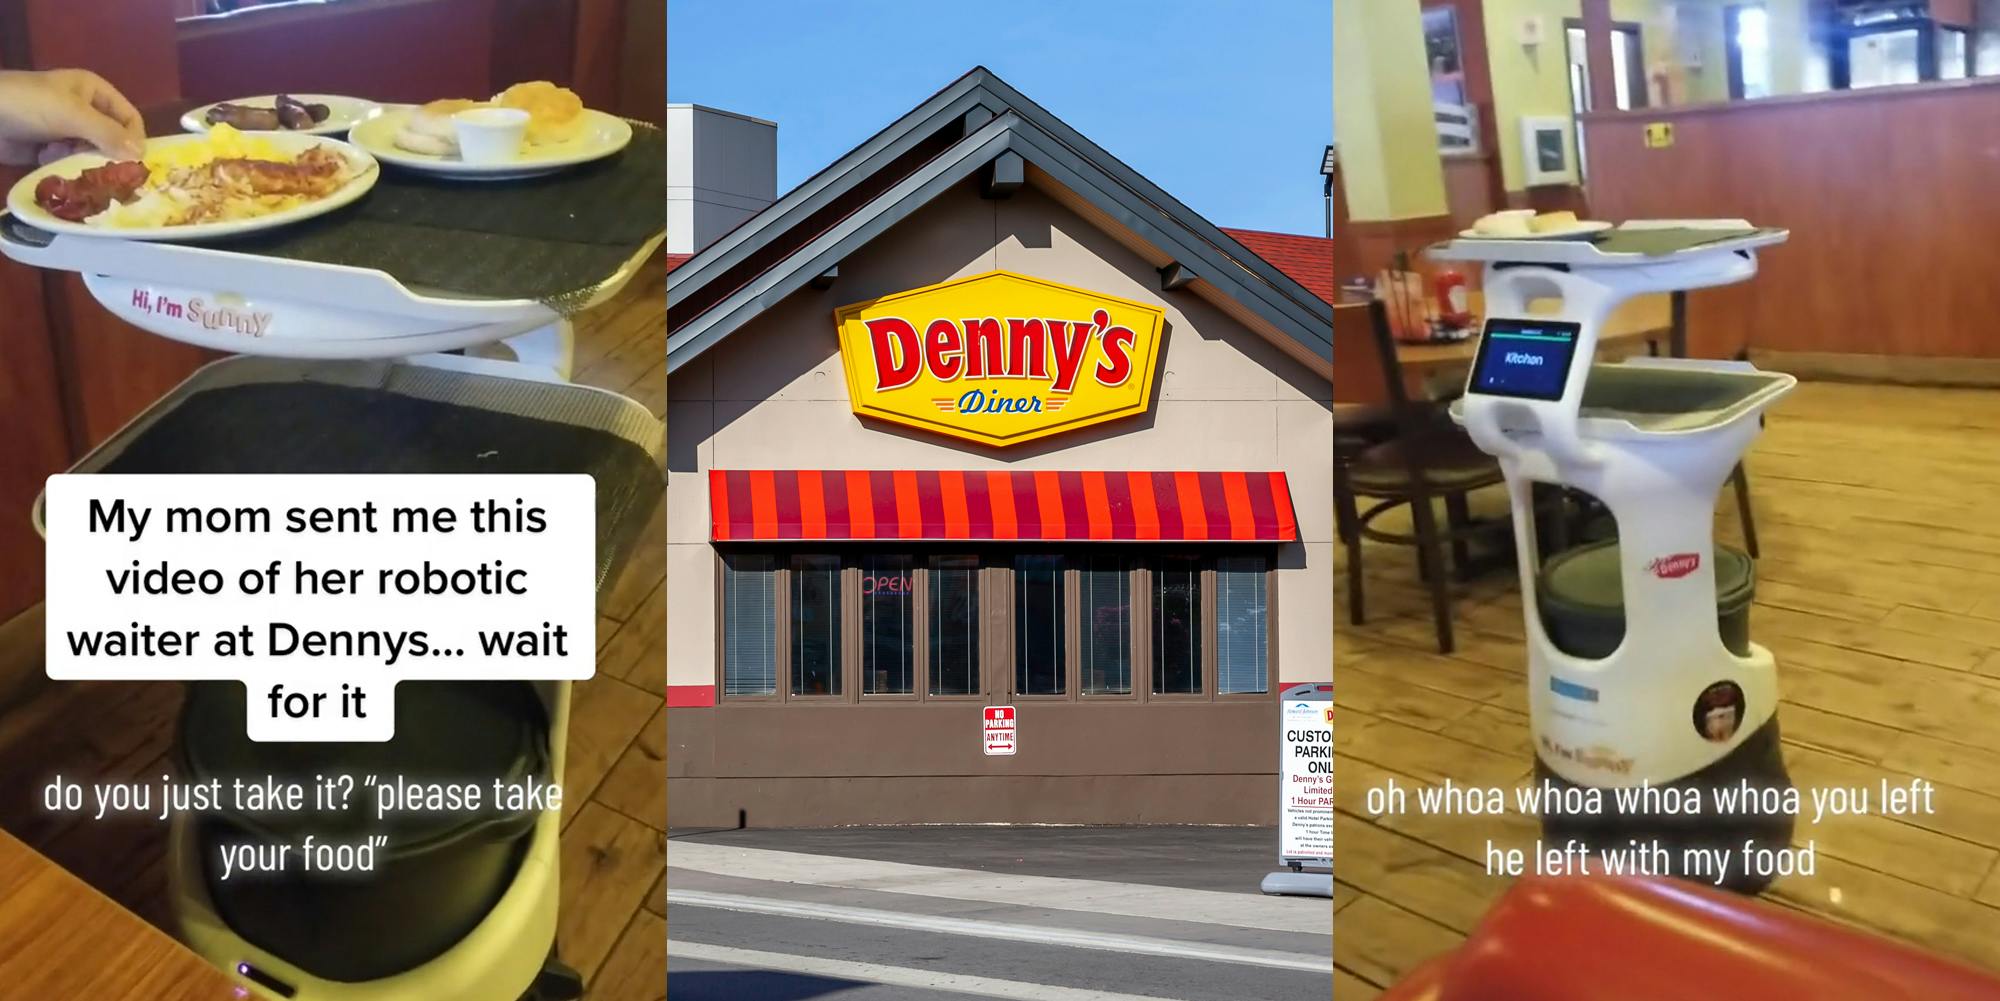 Denny's restaurant with robot server giving customers food with caption "My mom sent me this video of her robotic waiter at Dennys...wait fot it" "do you just take it?"please take your food"" (l) Denny's building with sign (c) Denny's robot server driving away with food with caption "oh whoa whoa whoa you left he left with my food" (r)